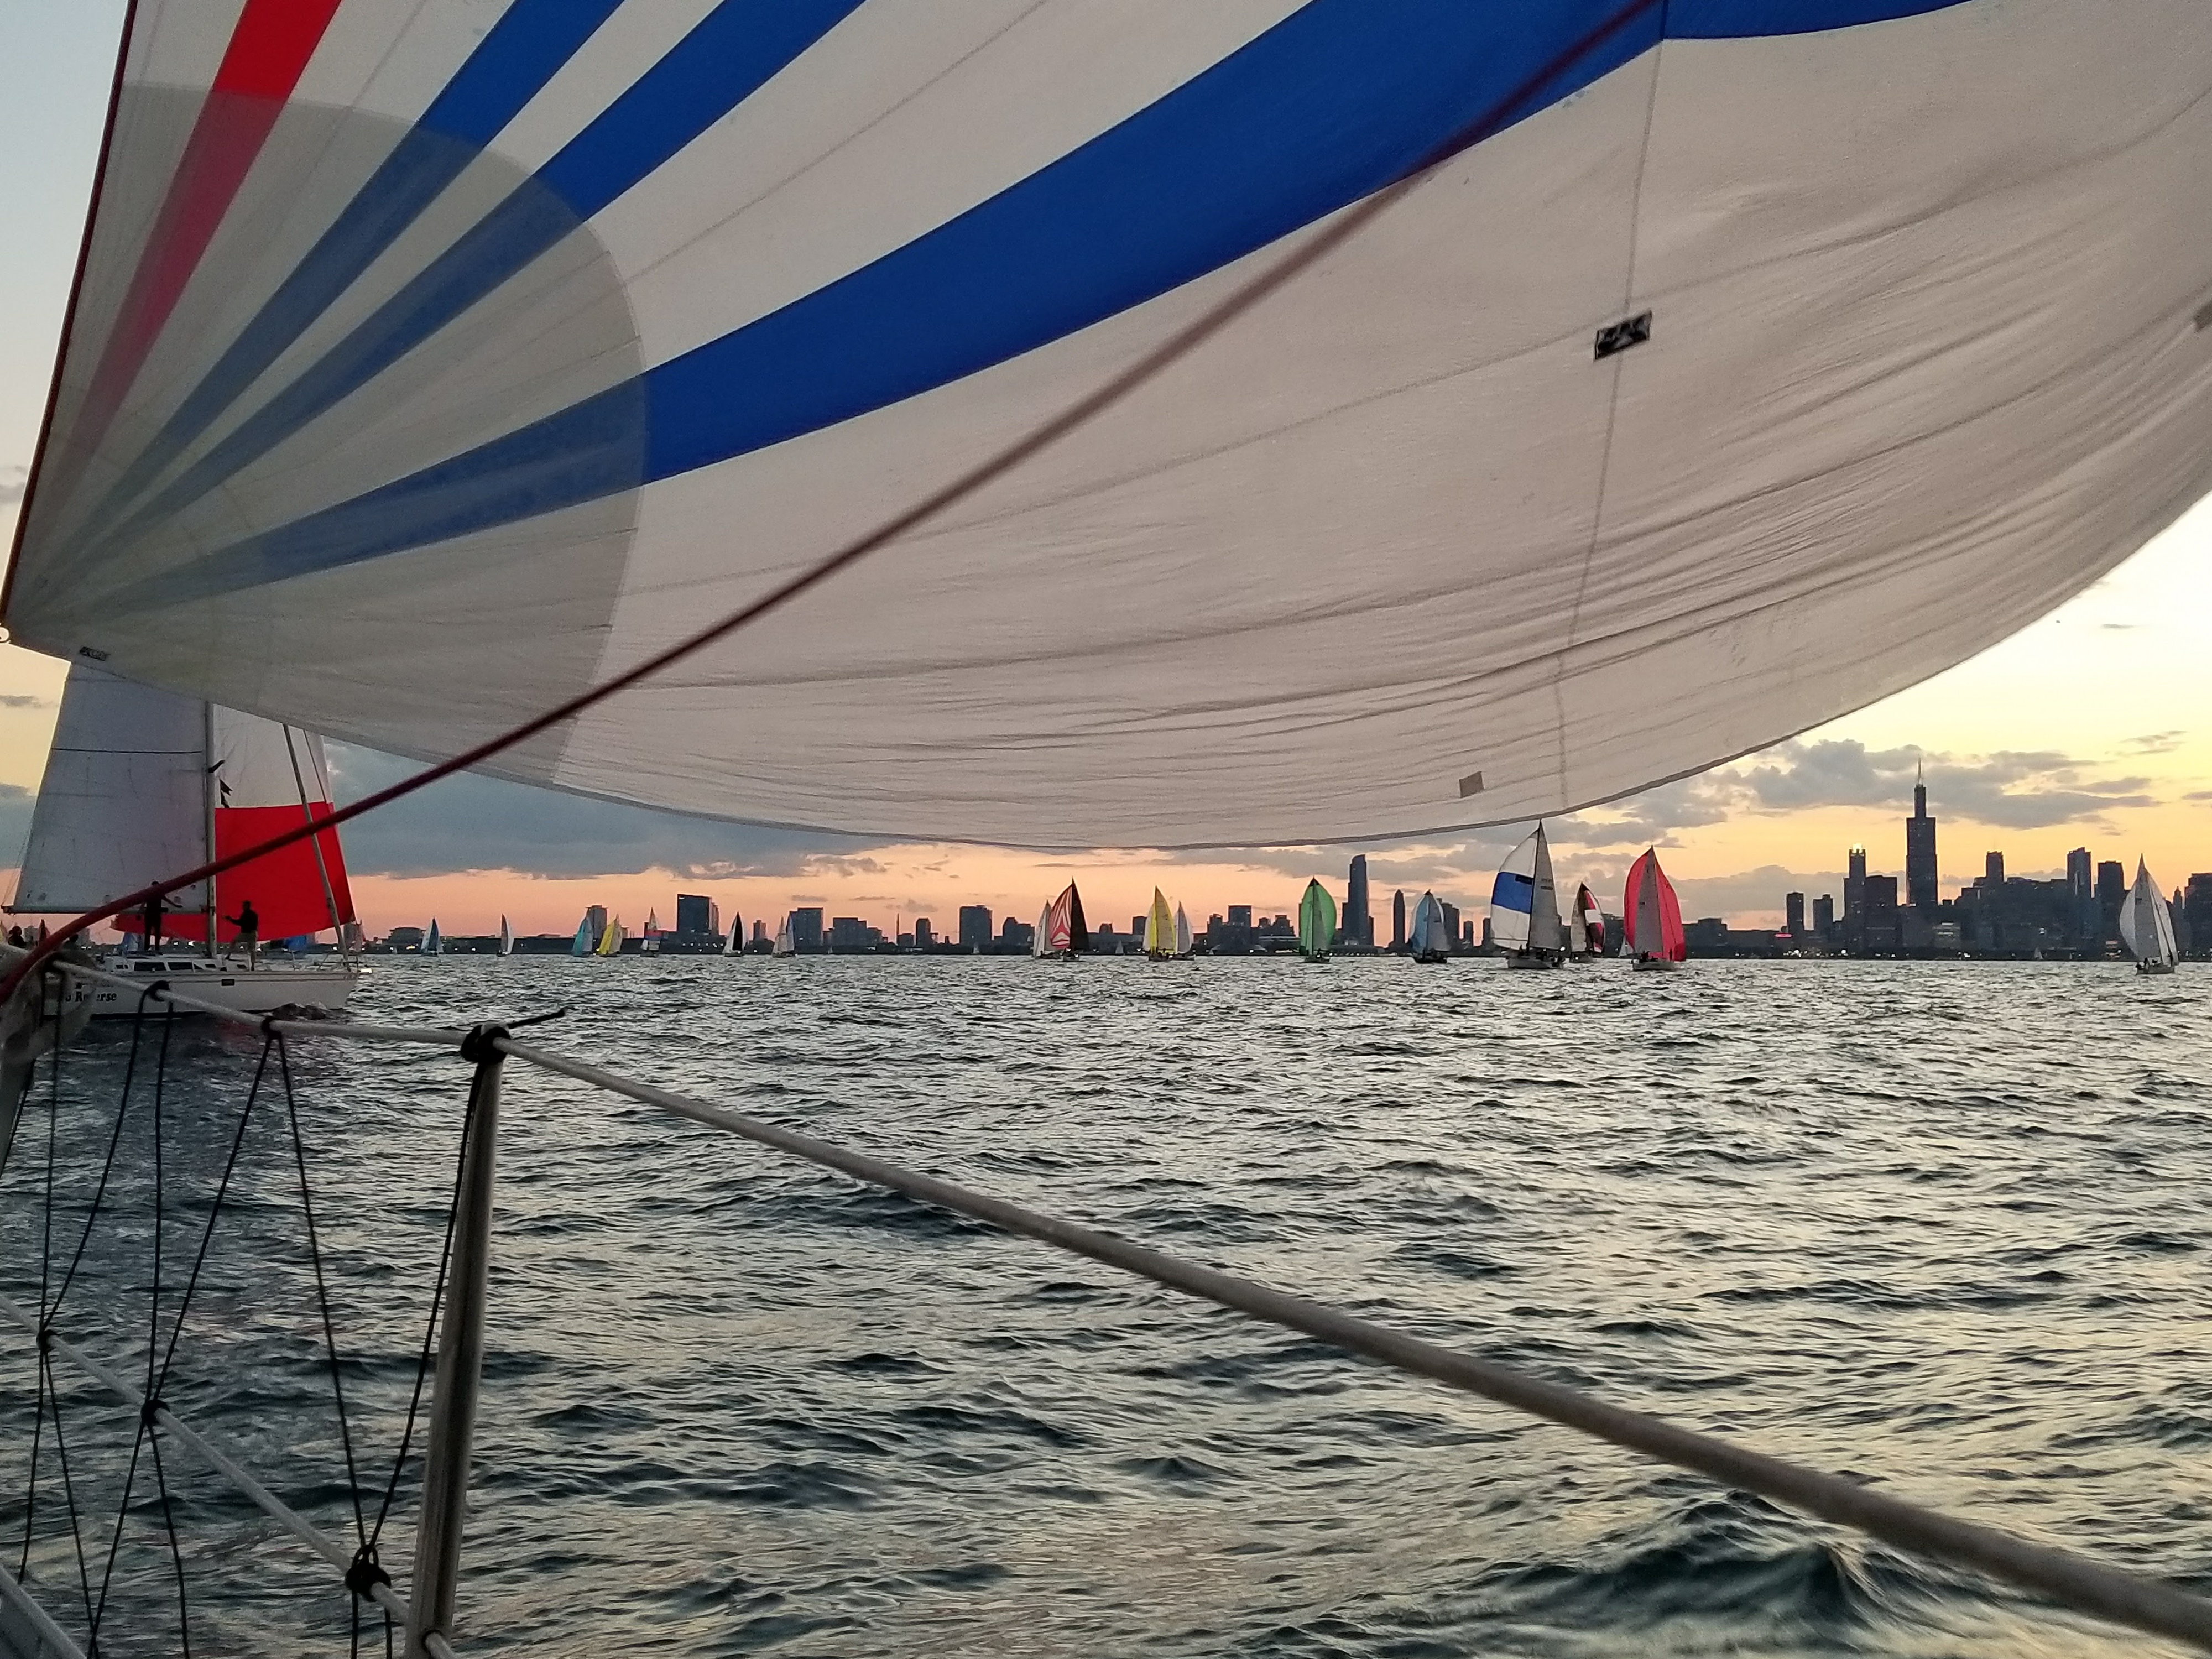 Over 250 boats set sail from Chicago in Race to Mackinac